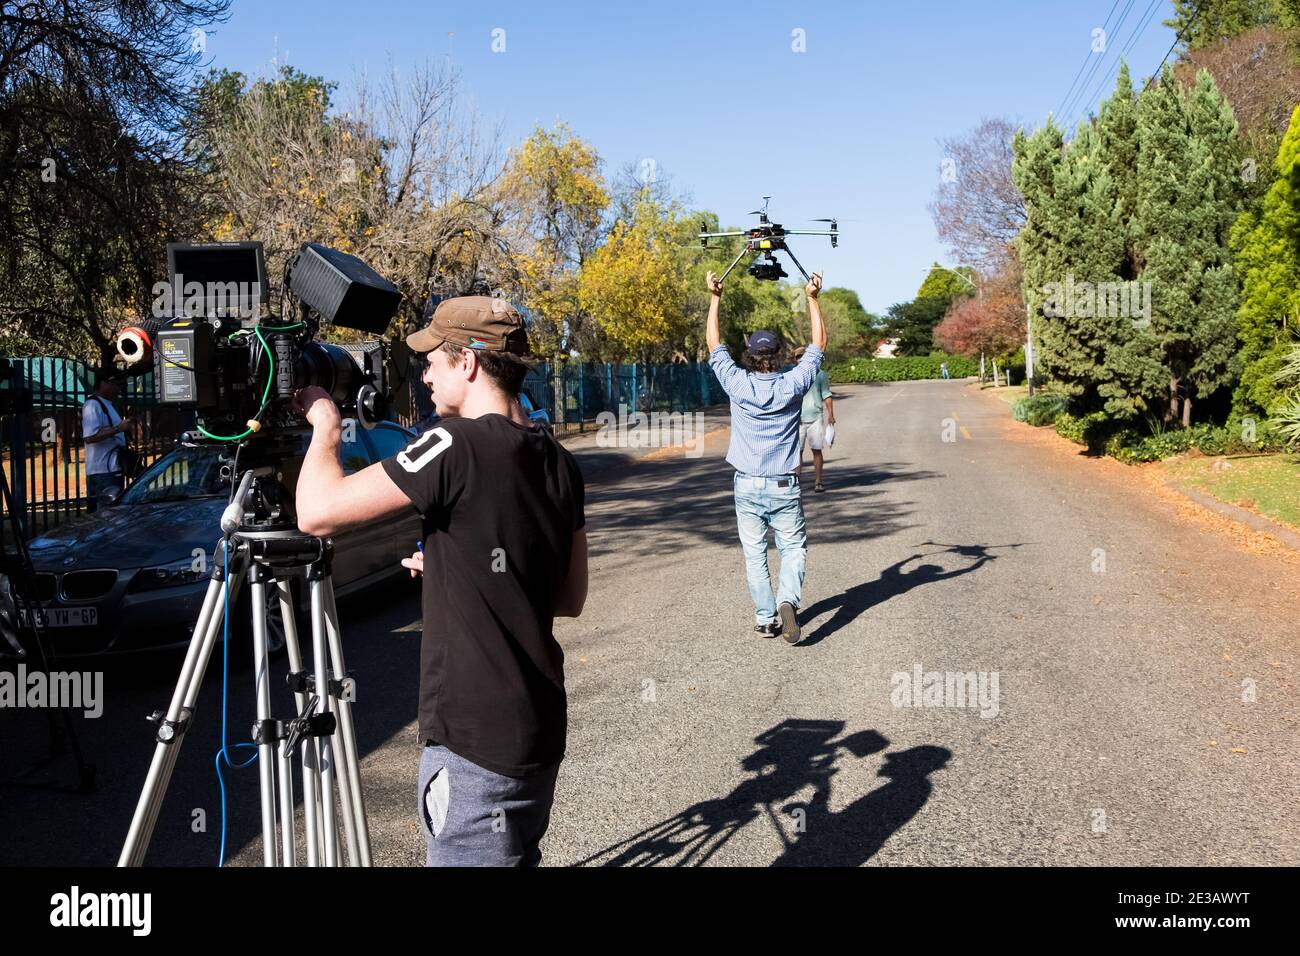 Johannesburg, South Africa - April 30, 2015: Behind the Scenes on location  on set of music video production using a large drone for filming Stock  Photo - Alamy